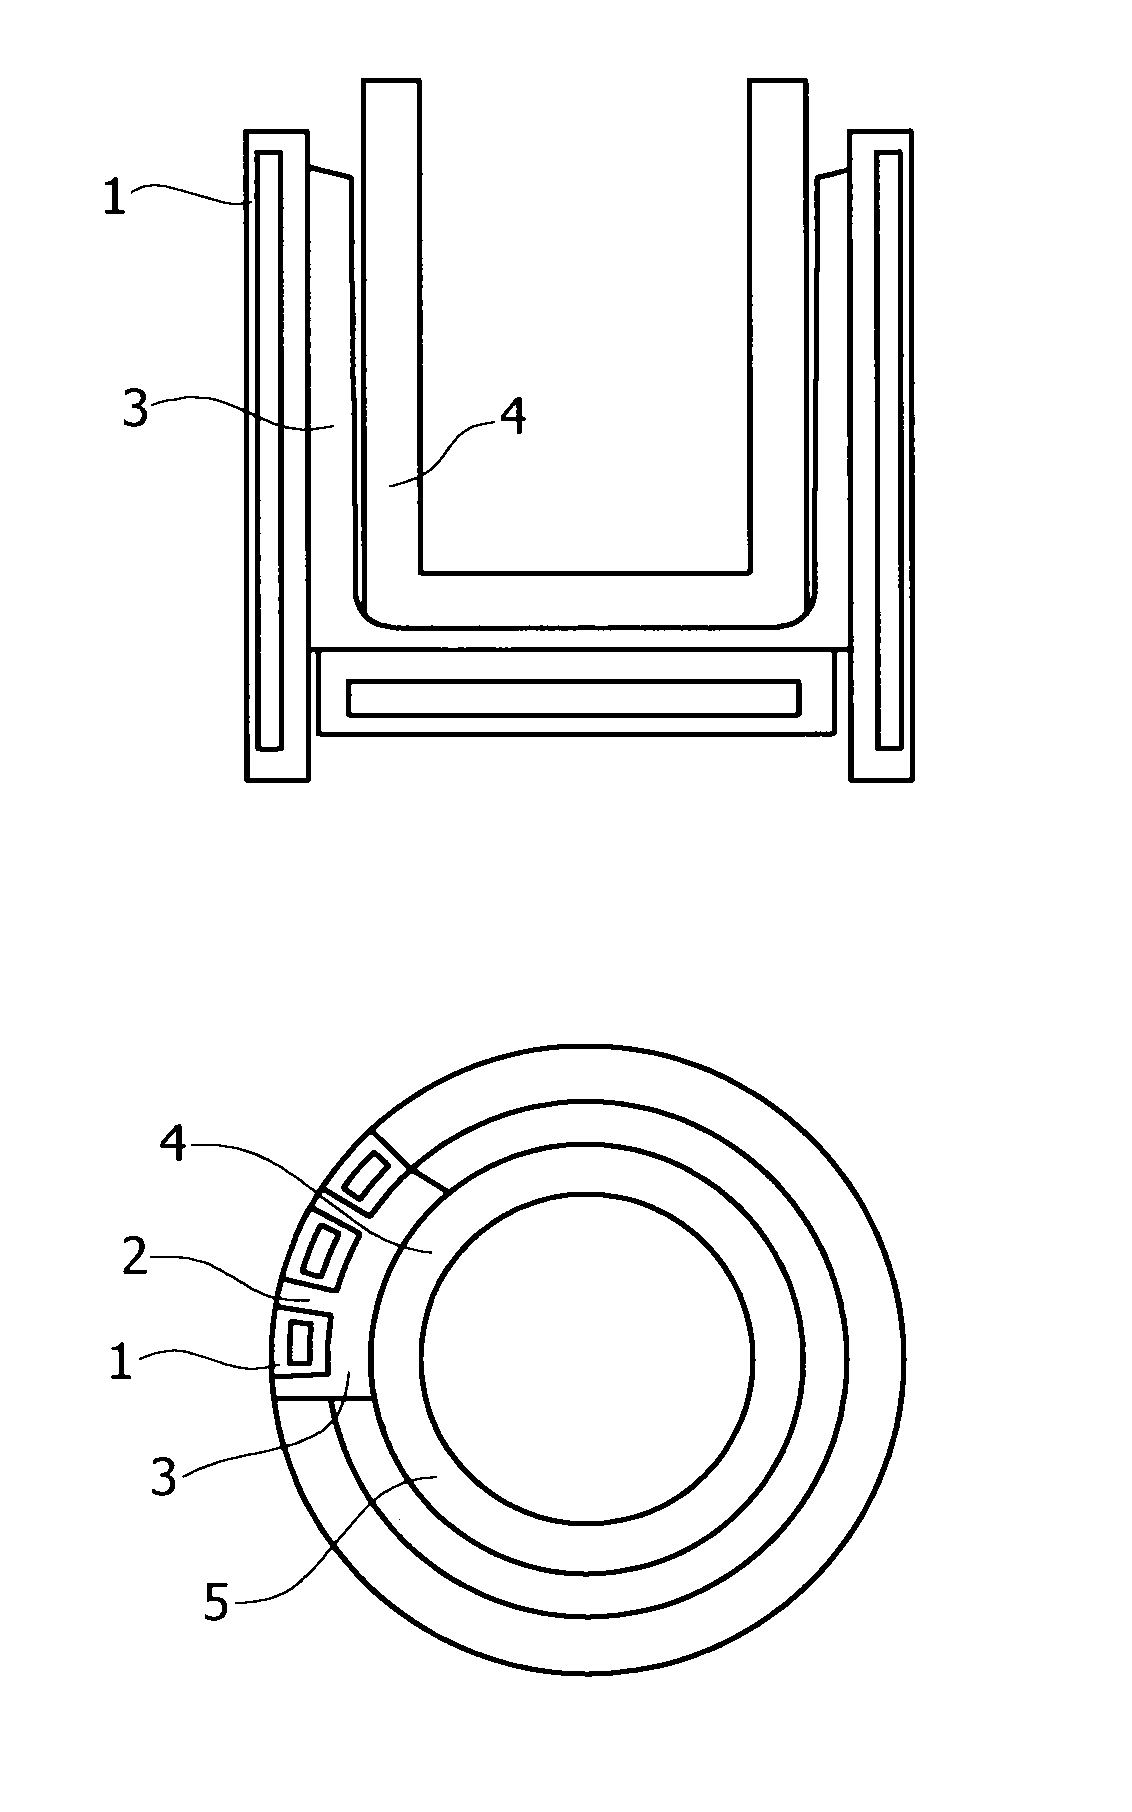 Induction melting apparatus employing halide type crucible, process for producing the crucible, method of induction melting, and process for producing ingot of ultrahigh-purity Fe-, Ni-, or Co-based alloy material